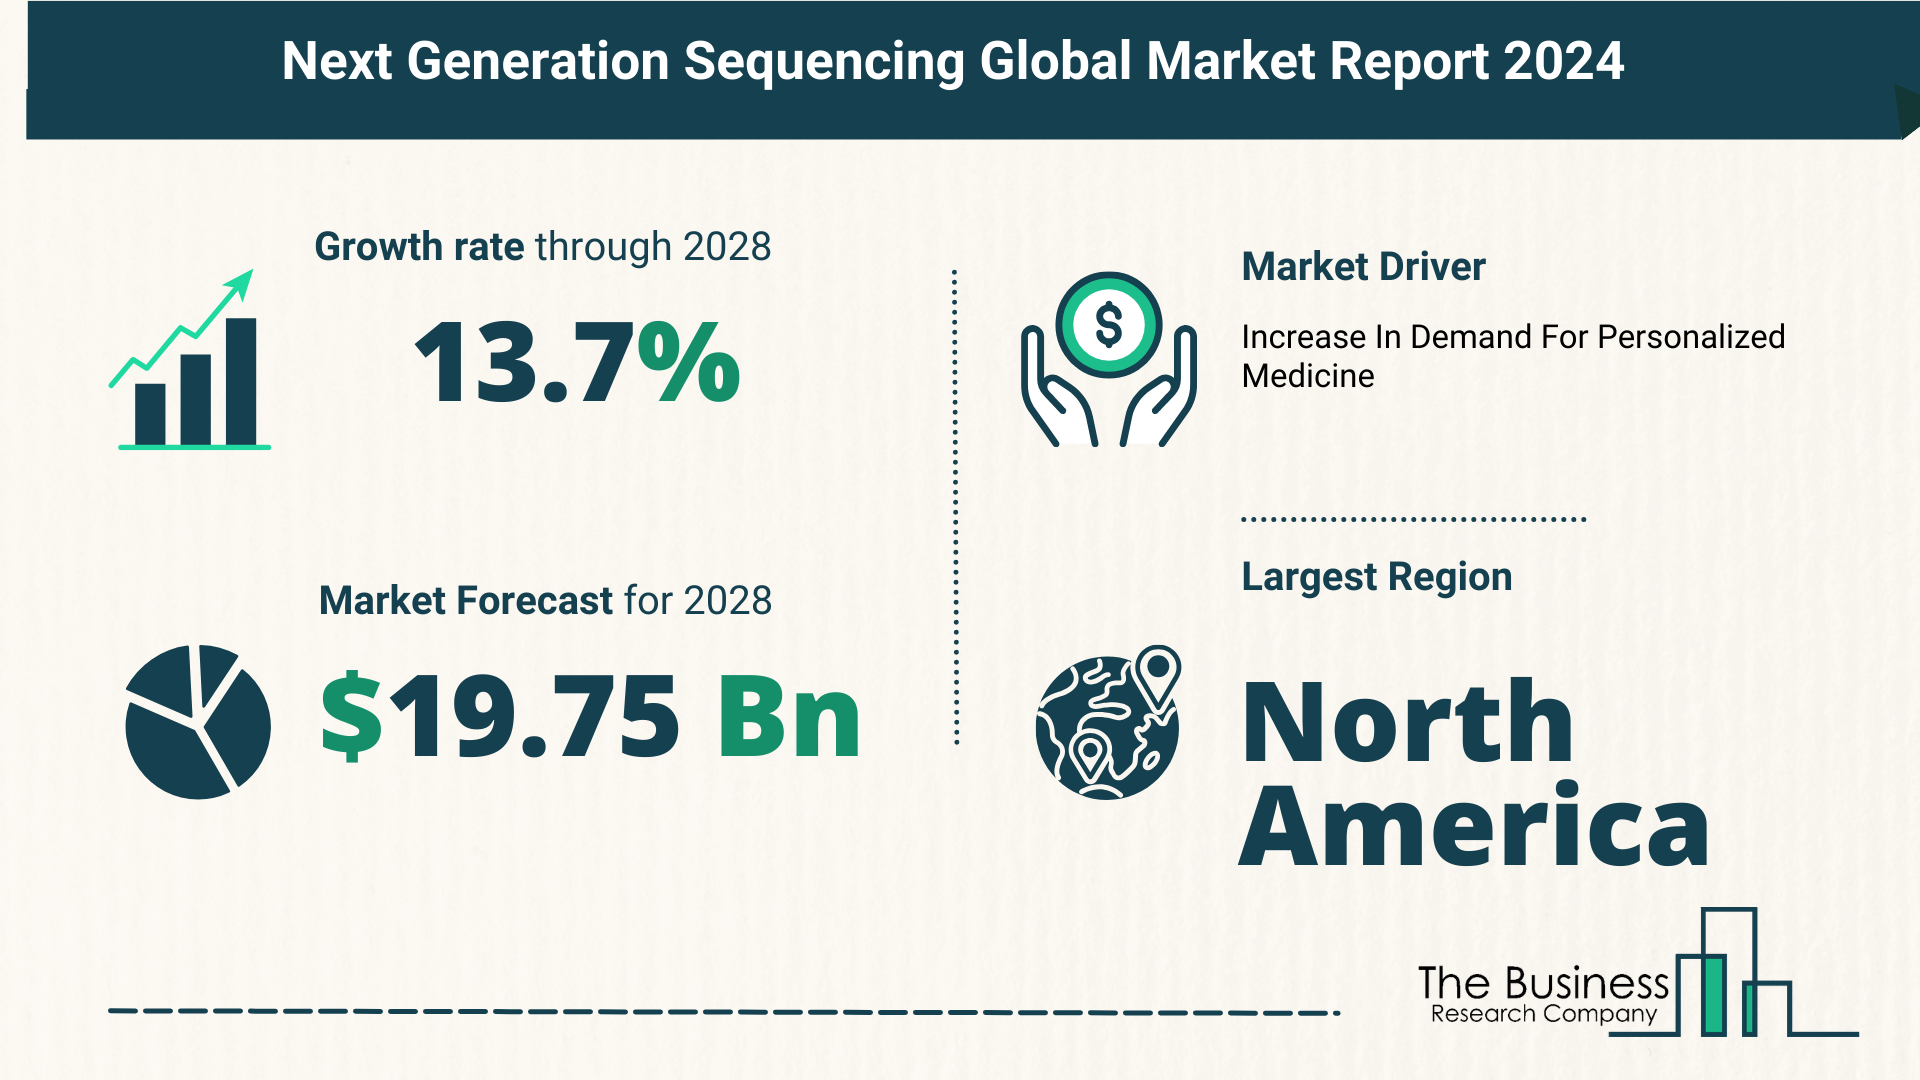 Global Next Generation Sequencing Market